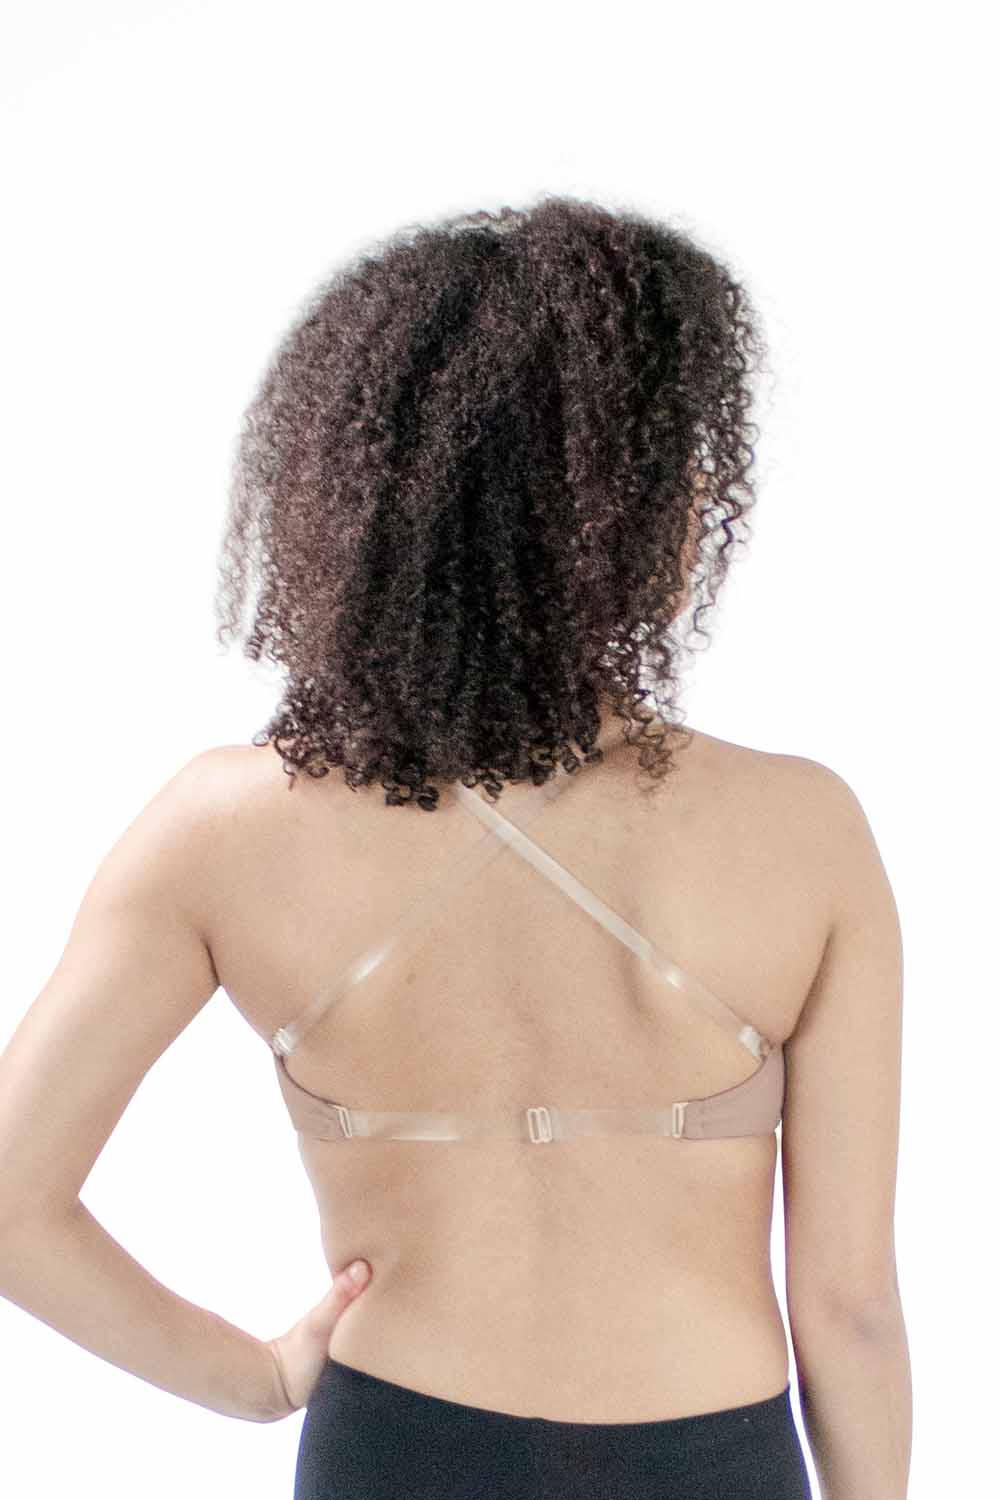 Lounge bra microfiber without clasp racerback sand - Mix & Relax Lounge